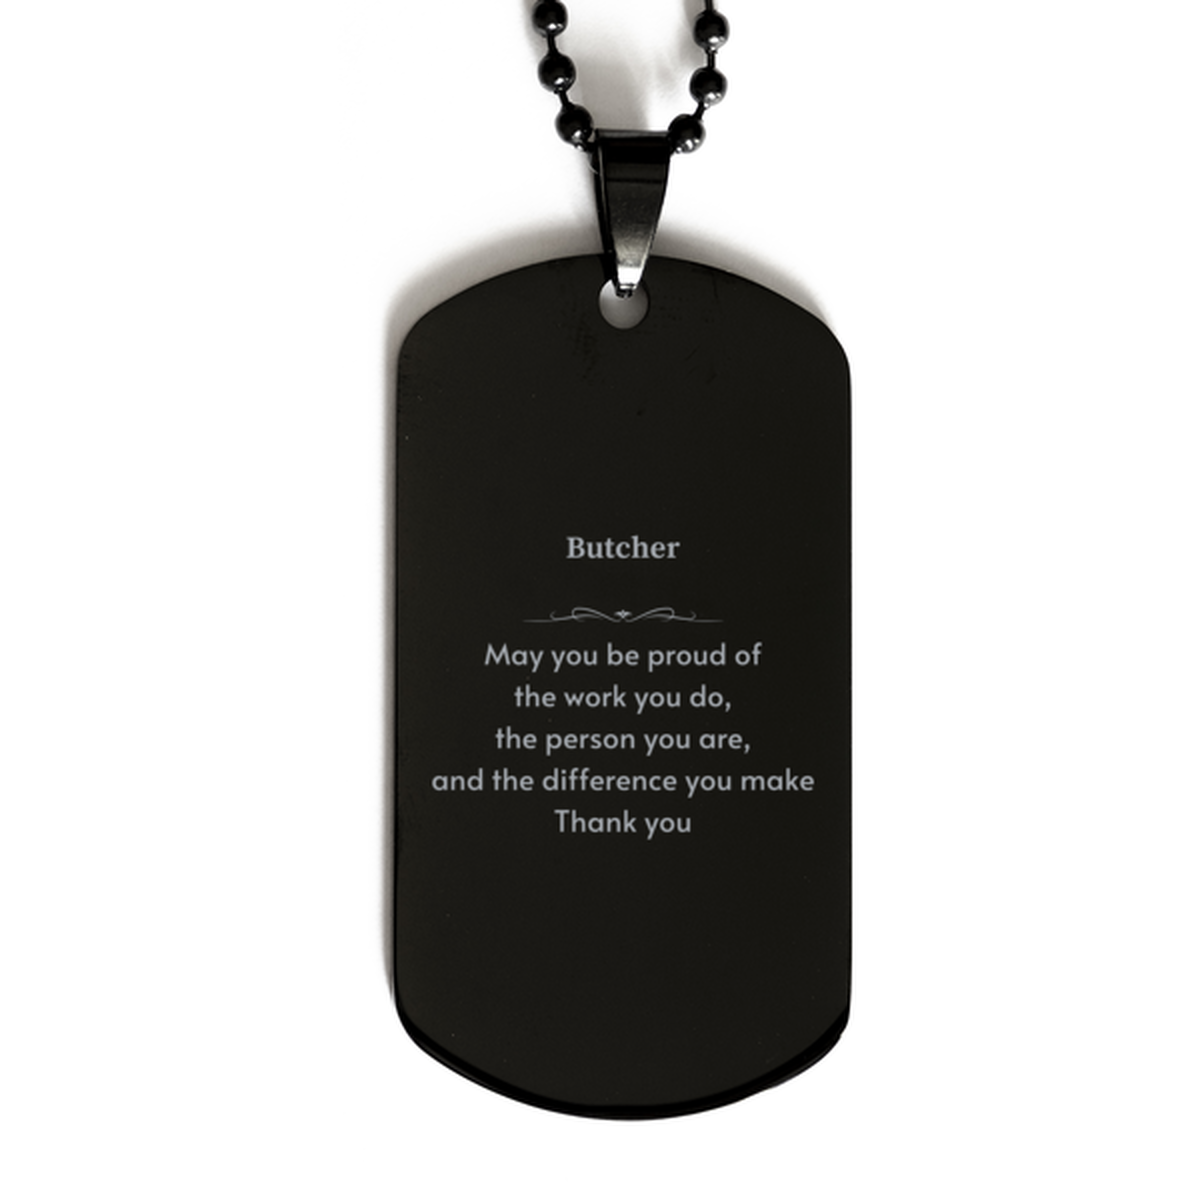 Heartwarming Black Dog Tag Retirement Coworkers Gifts for Butcher, Butcher May You be proud of the work you do, the person you are Gifts for Boss Men Women Friends